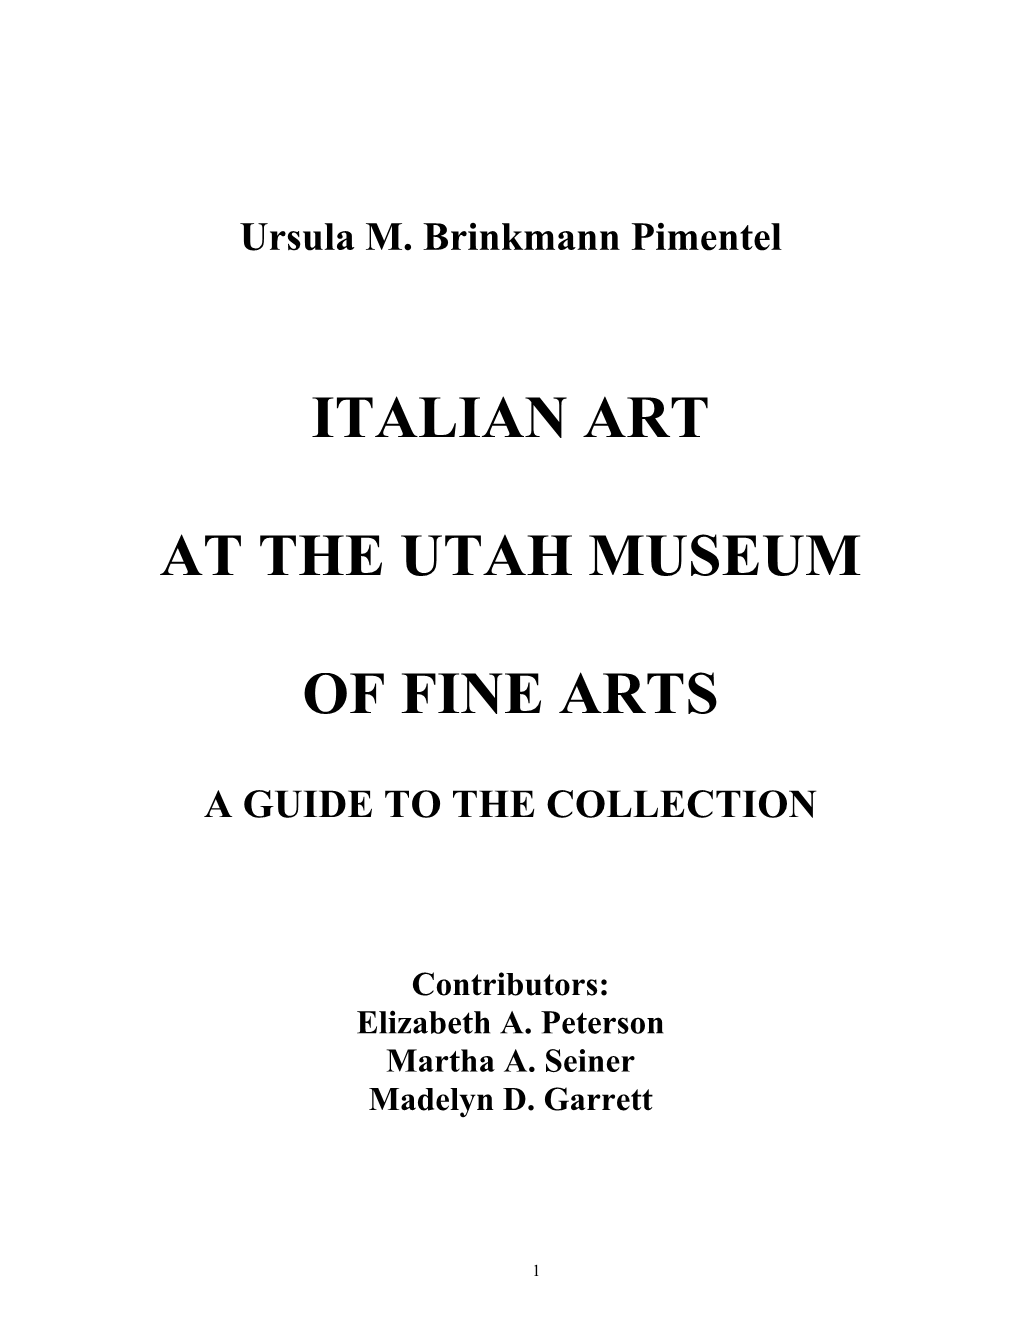 Italian Art at the Utah Museum of Fine Arts (UMFA) Spans Several Centuries, from the Late 1300S to the 1900S